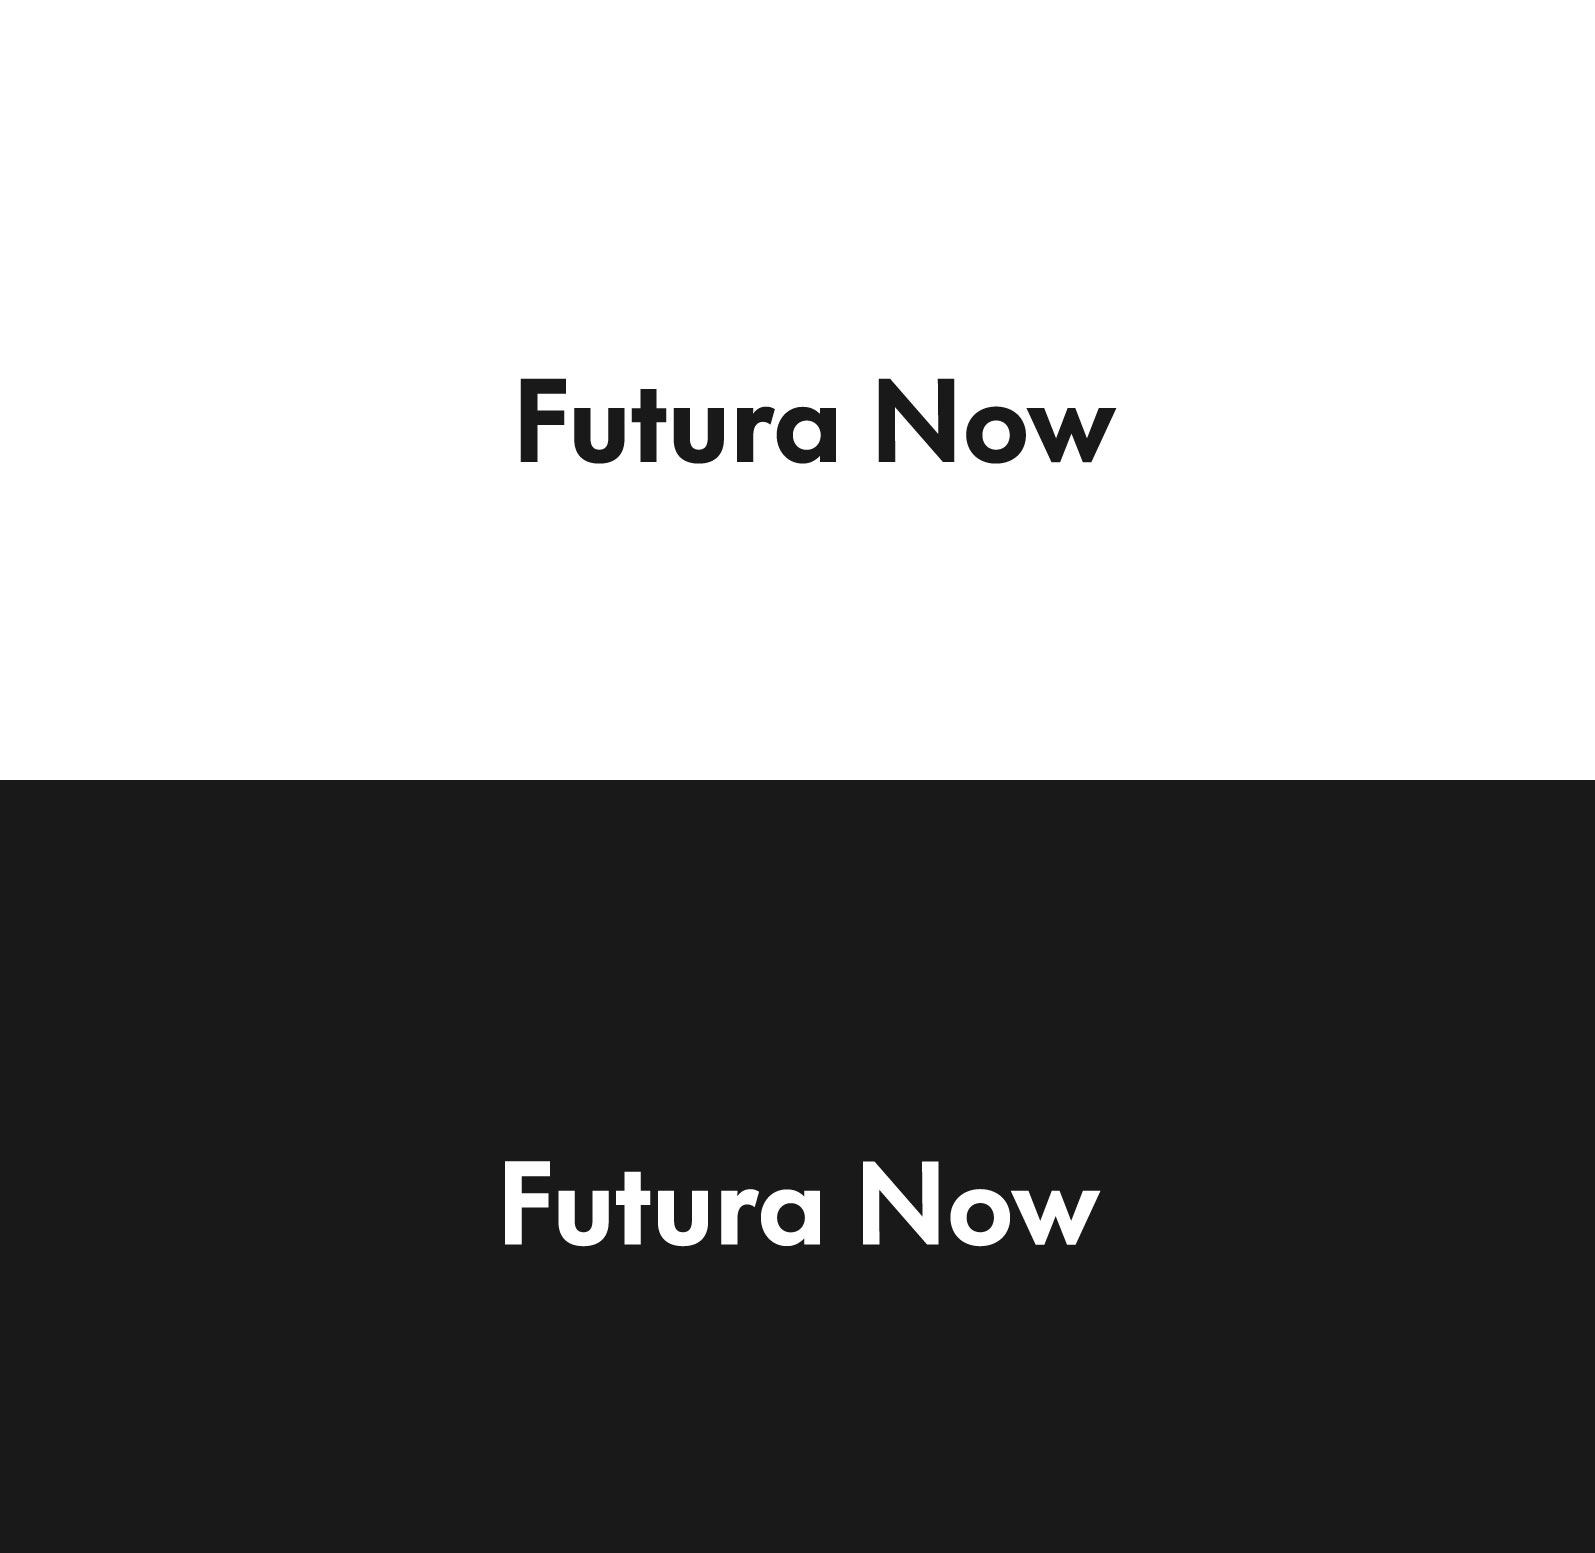 Futura Now - Free fonts for 2022